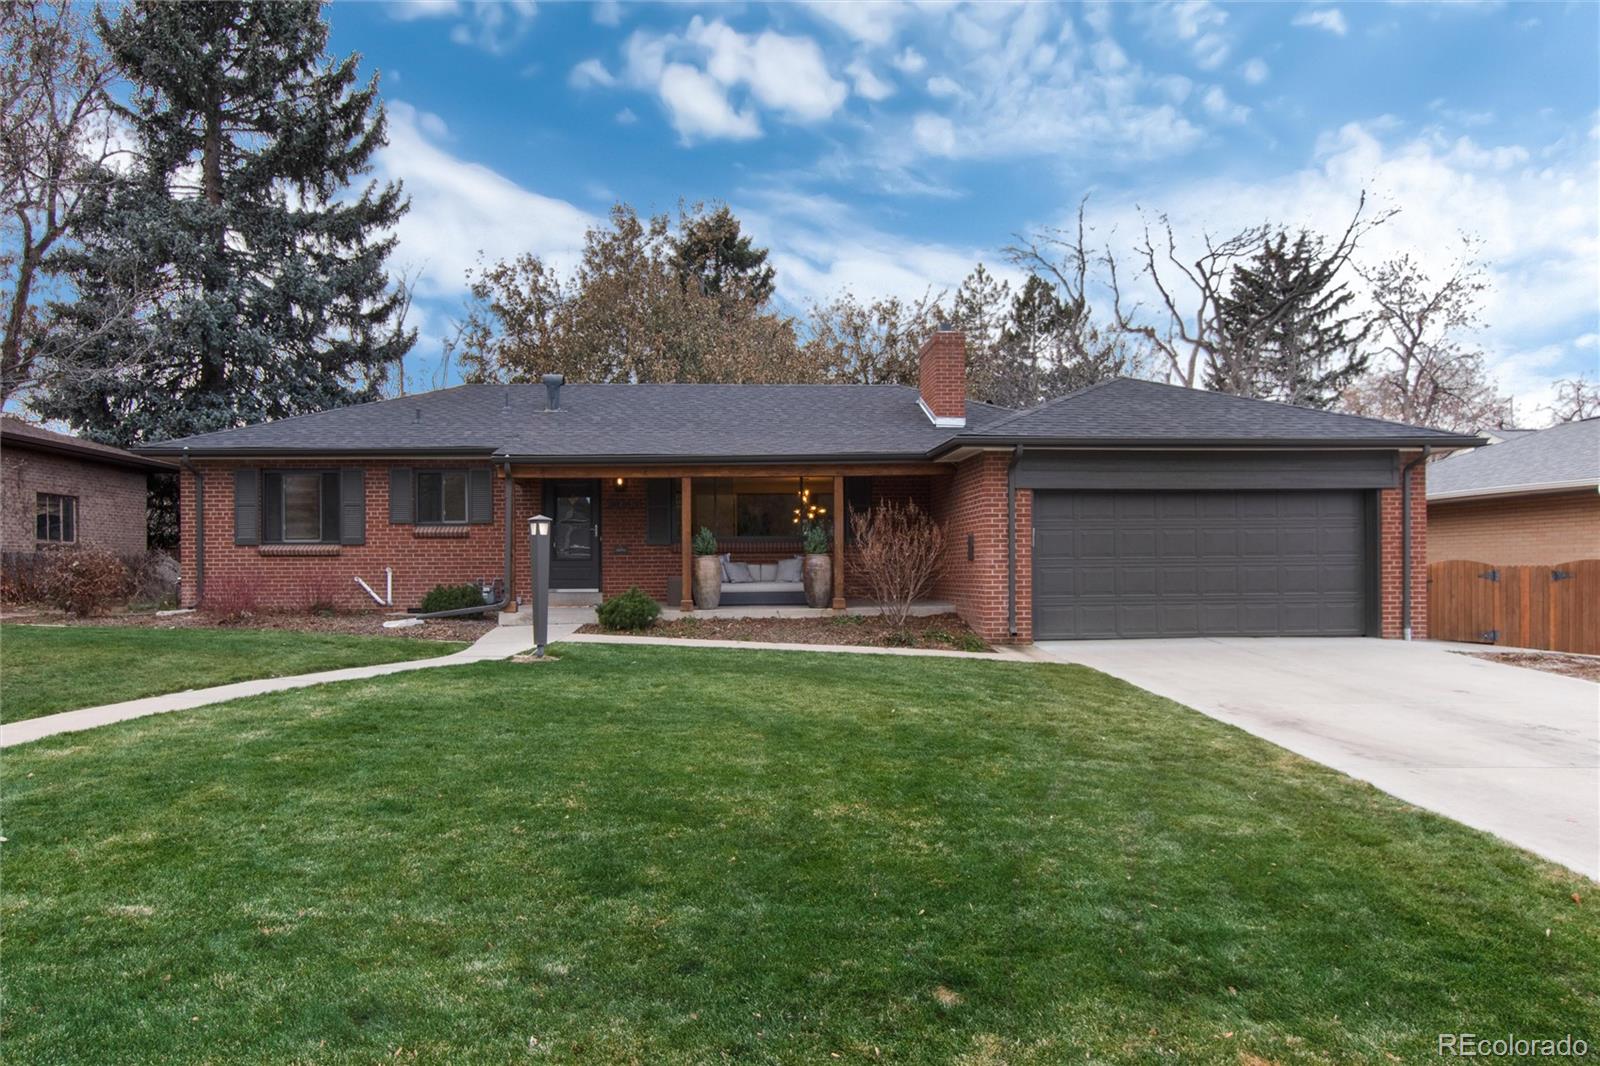 3001 s garfield street, Denver sold home. Closed on 2024-02-12 for $1,300,000.